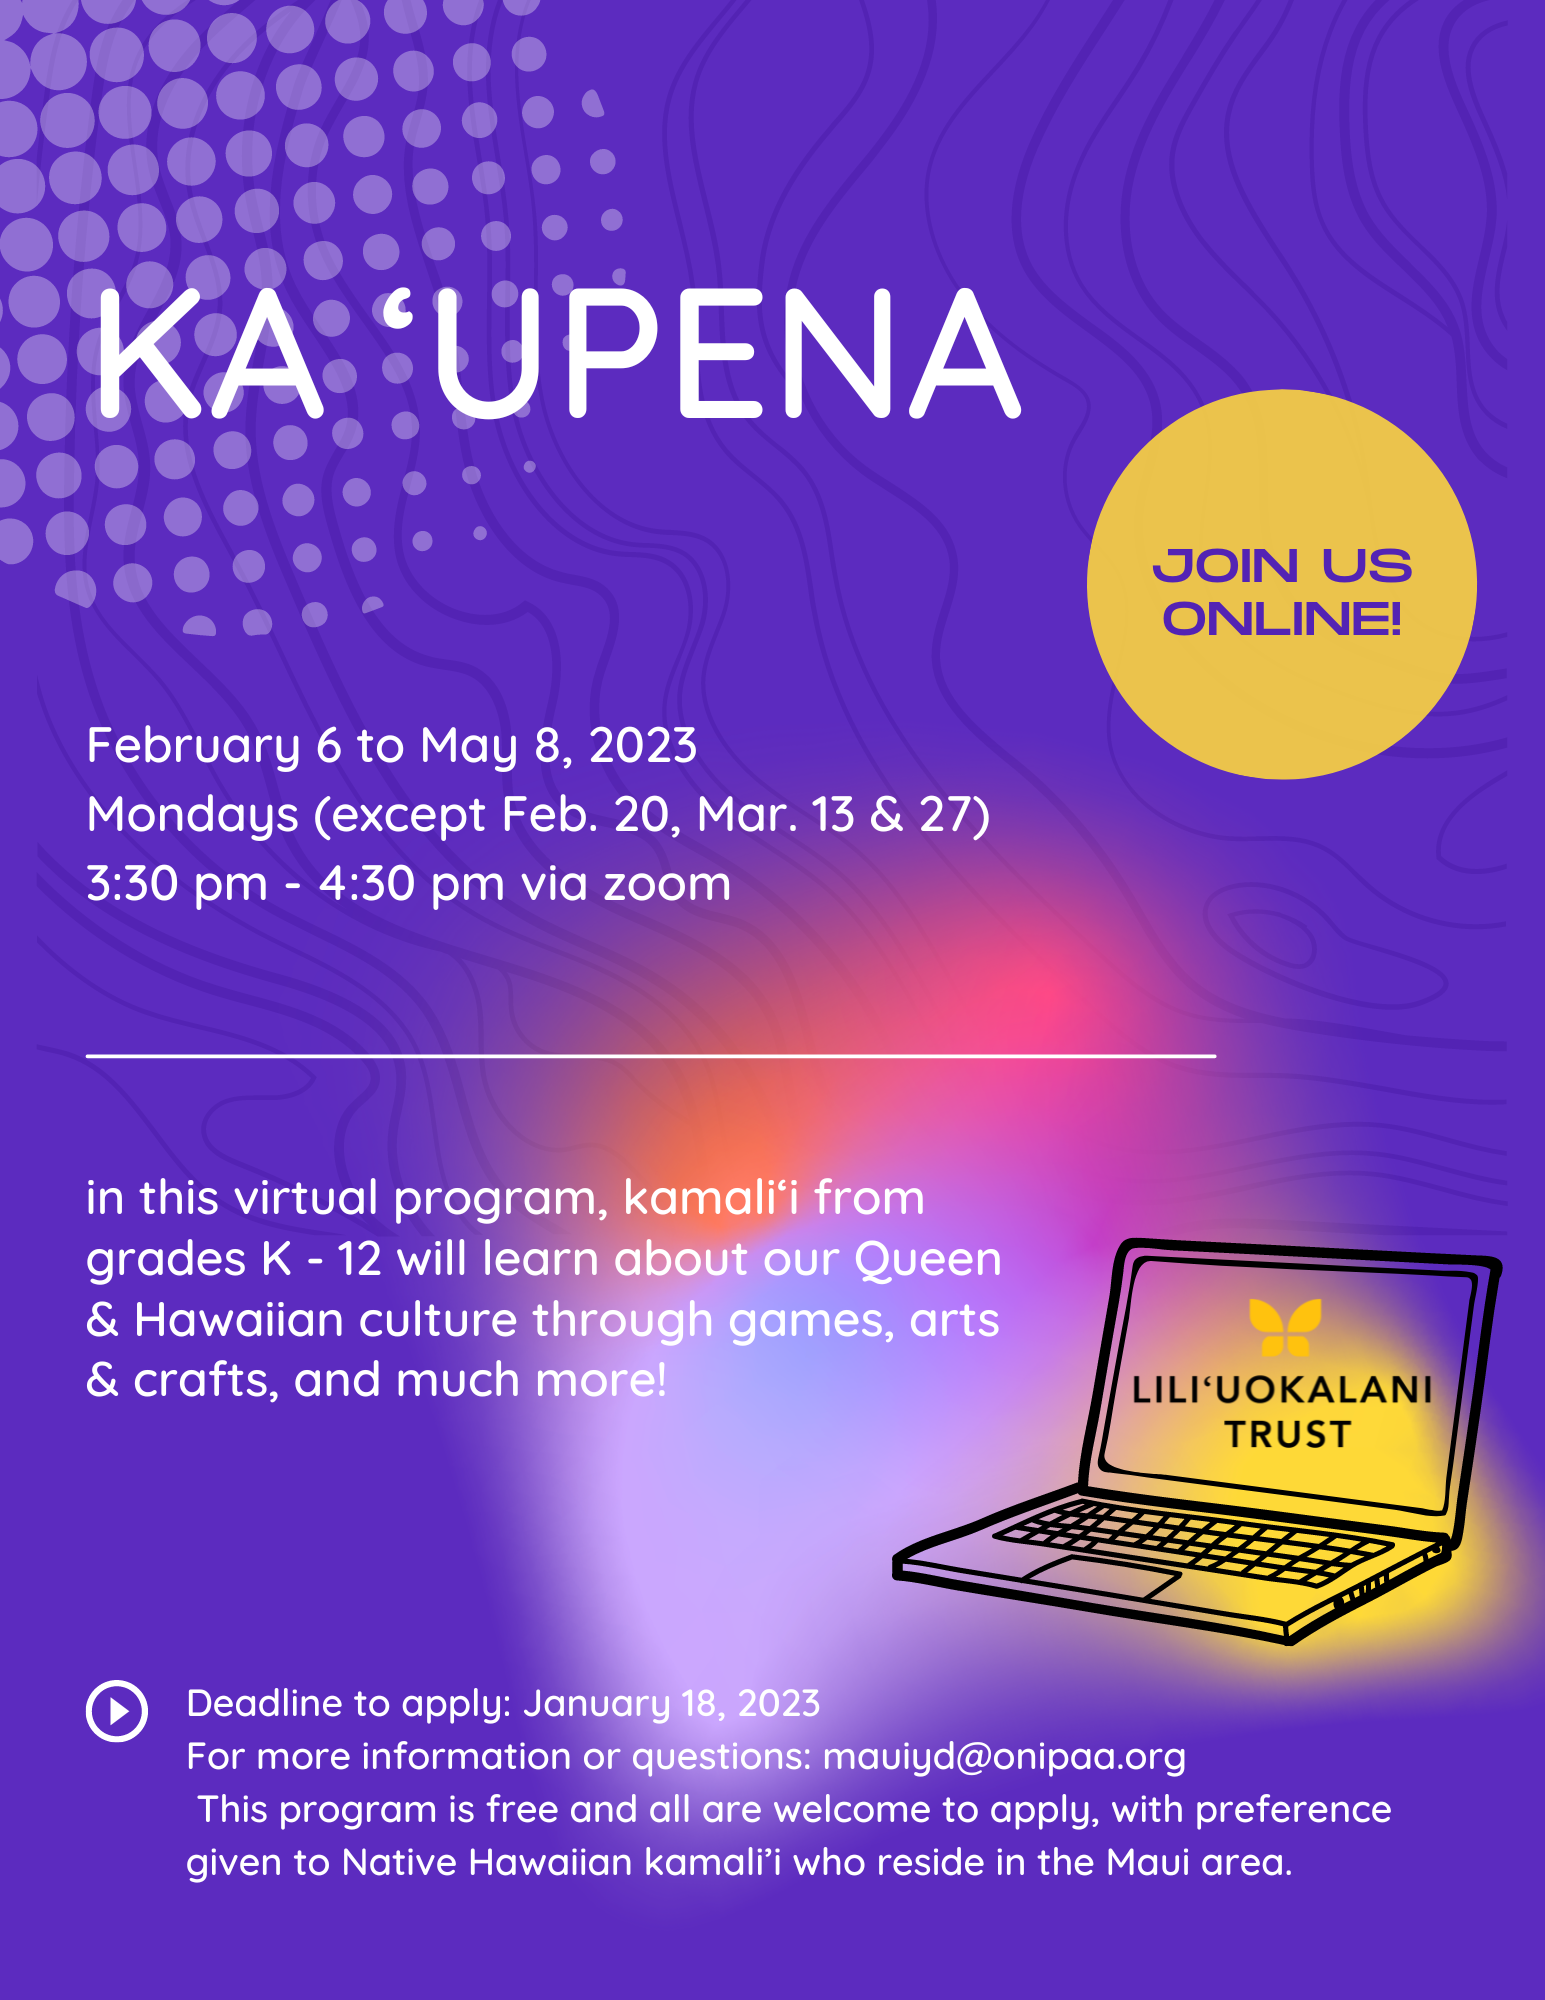 The poster for Ka ʻUpena, a virtual learning program for youth on Maui.